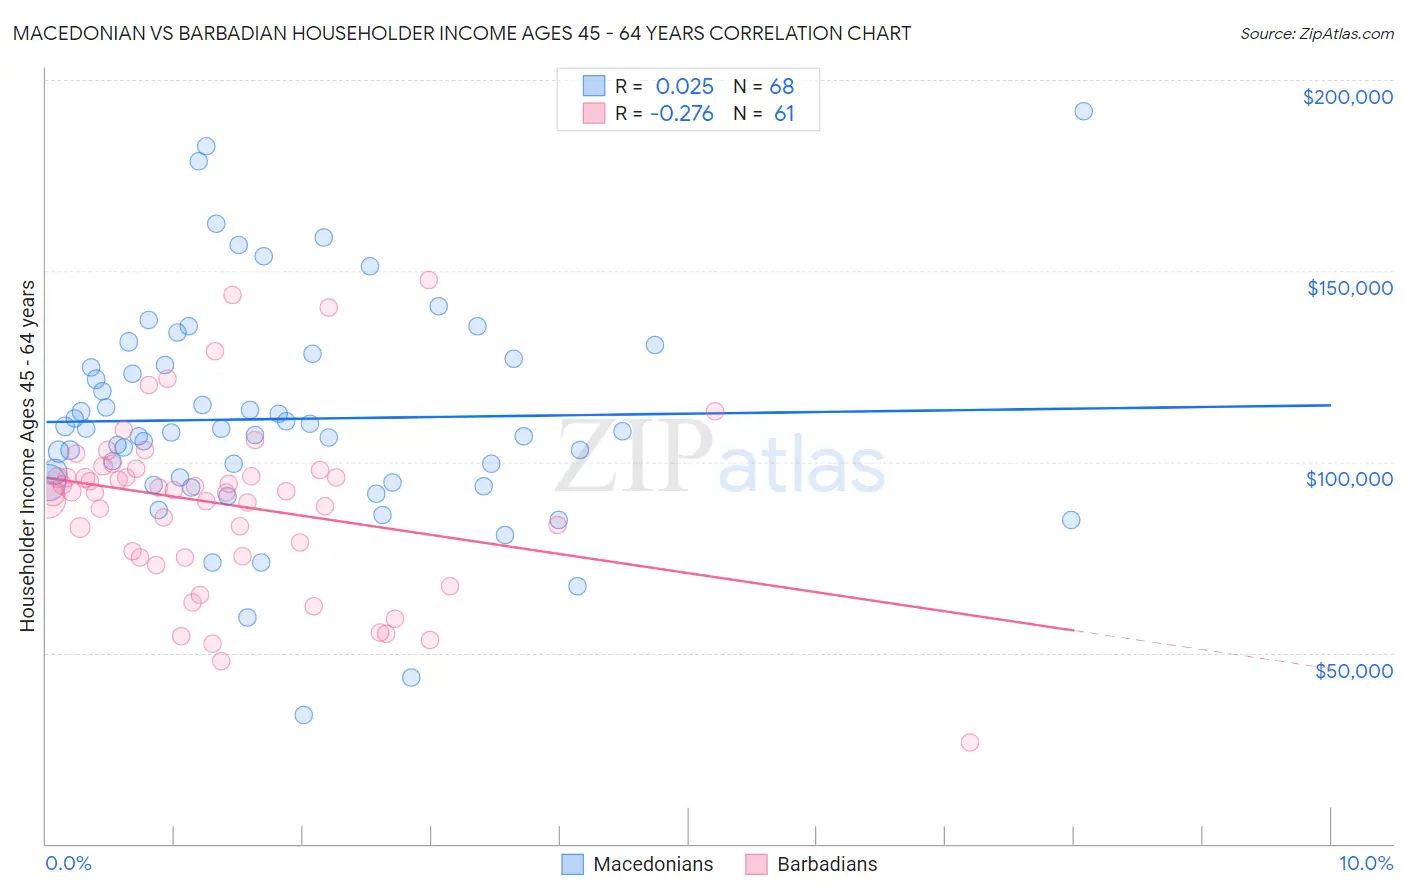 Macedonian vs Barbadian Householder Income Ages 45 - 64 years